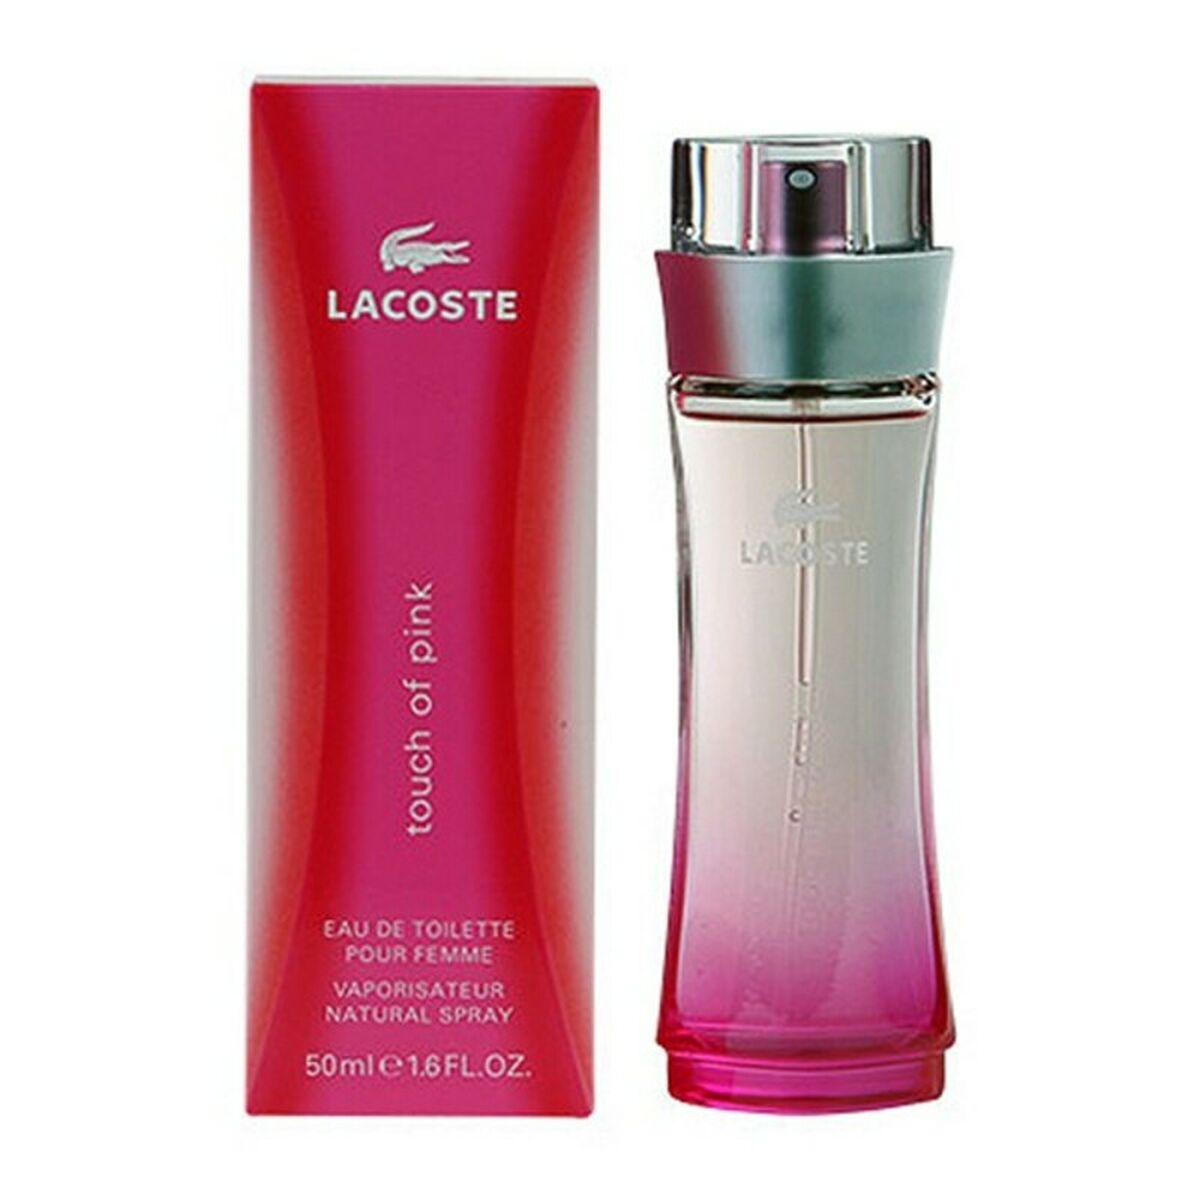 at se nederdel Vugge Women's Perfume Touch Of Pink Lacoste EDT – UrbanHeer